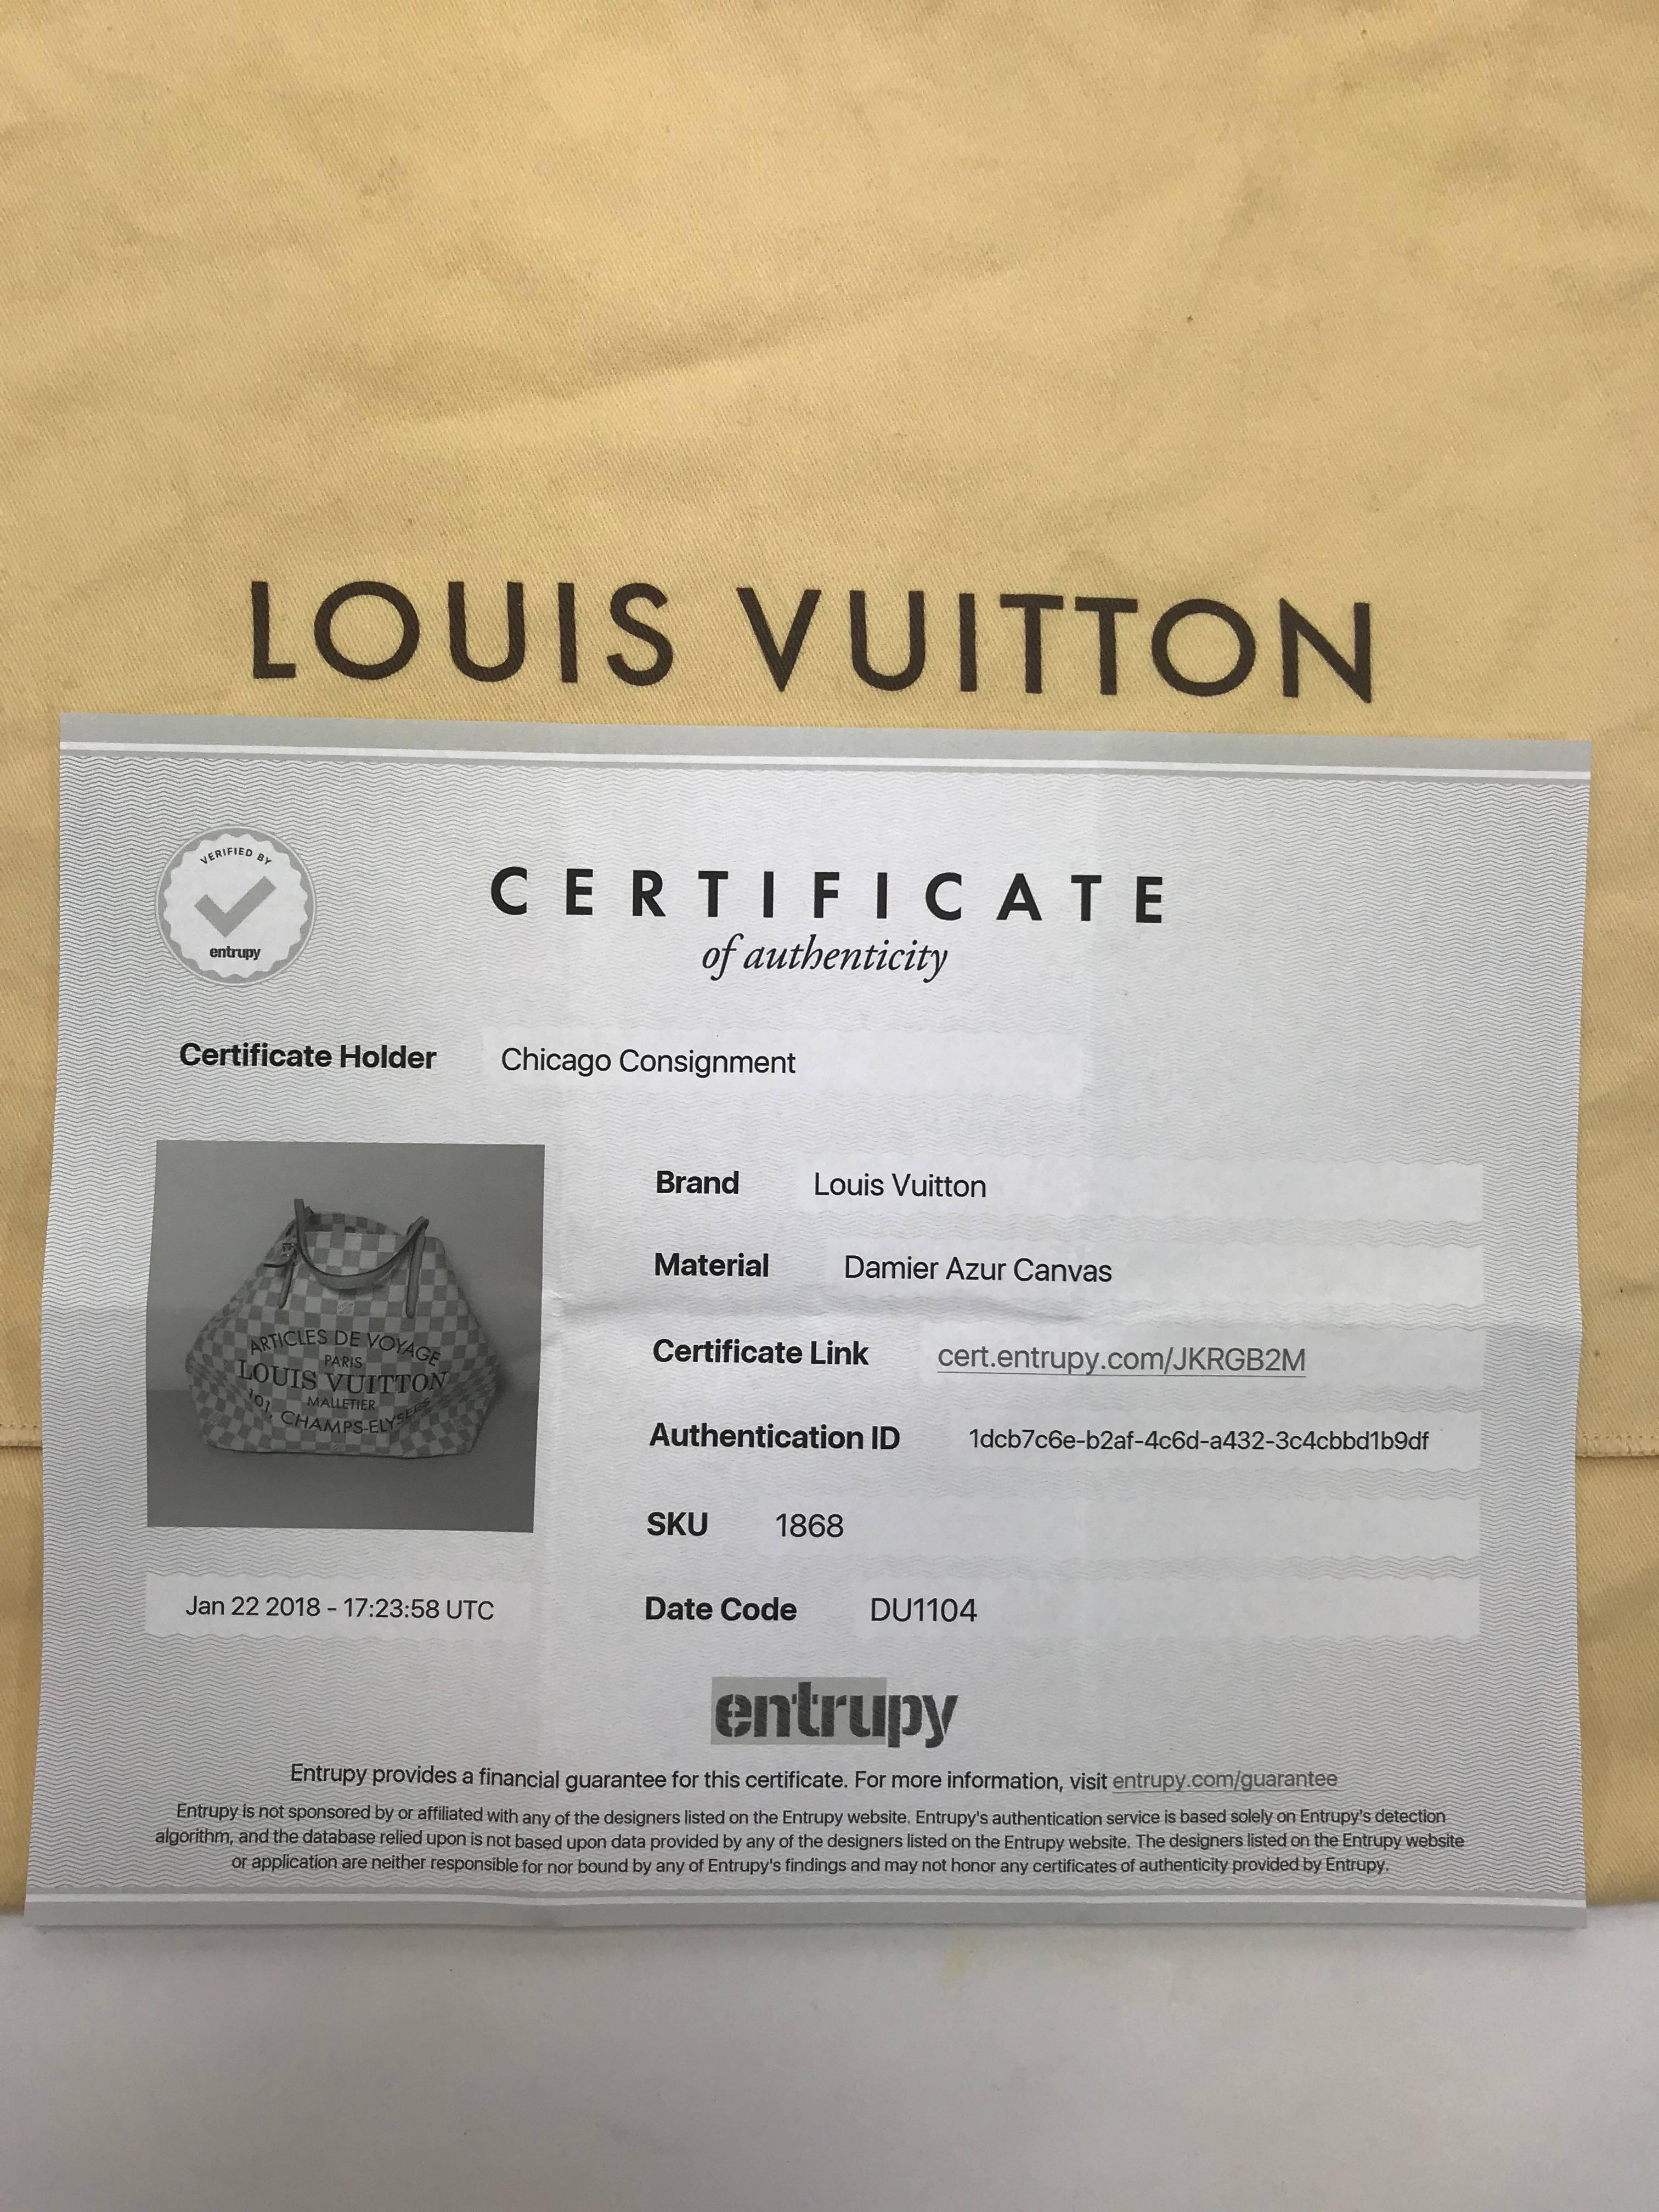 MODEL - Louis Vuitton Damier Azur Cabas MM

CONDITION - Very Good. Clean and light vachetta free of watermarks except one smudge on underside of strap. No rips, holes, tears, or odors. Piece maintains original shape without cracks or creases. Bright